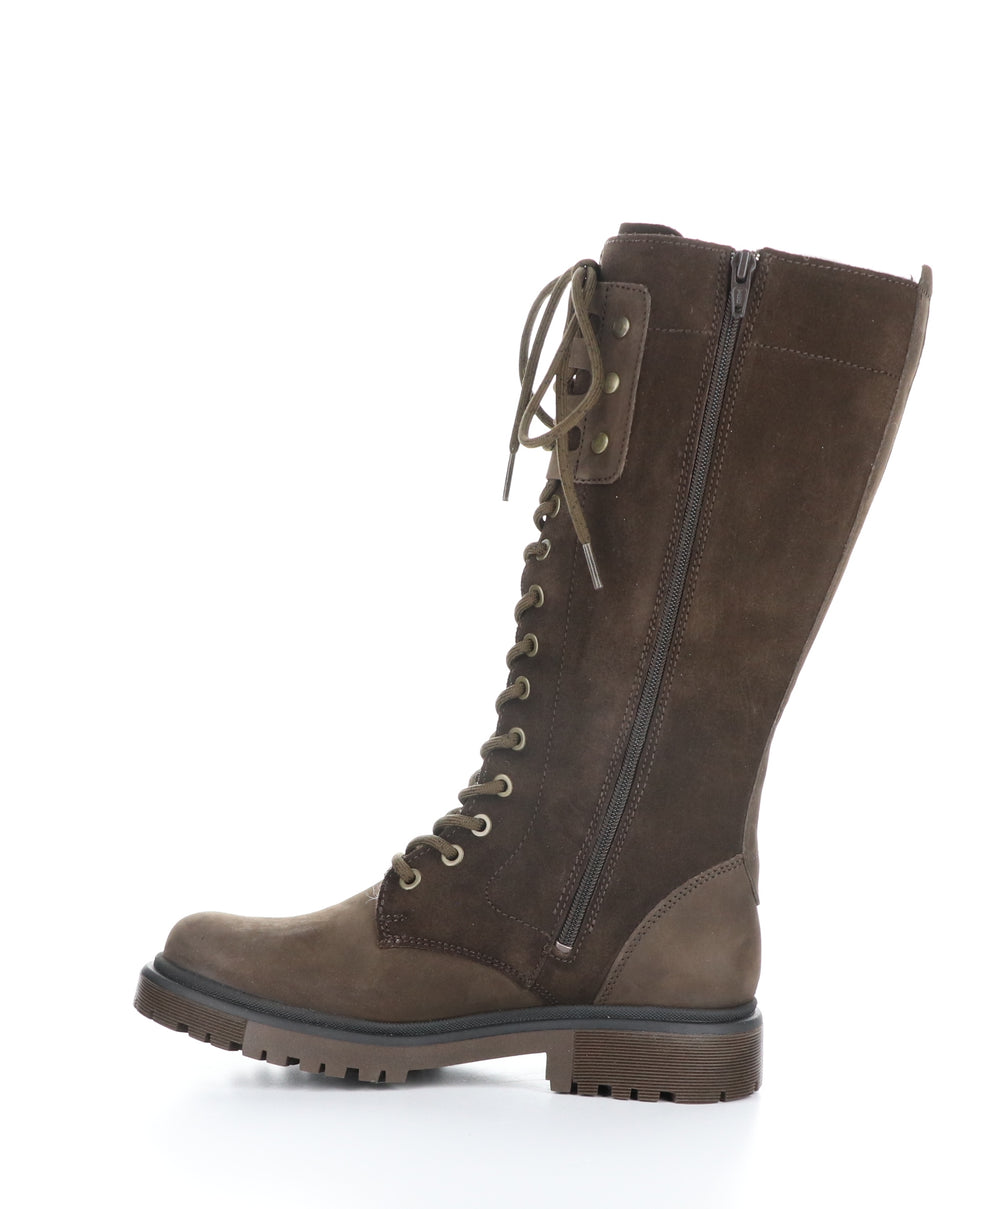 AXE DK BROWN/COFFEE Round Toe Boots